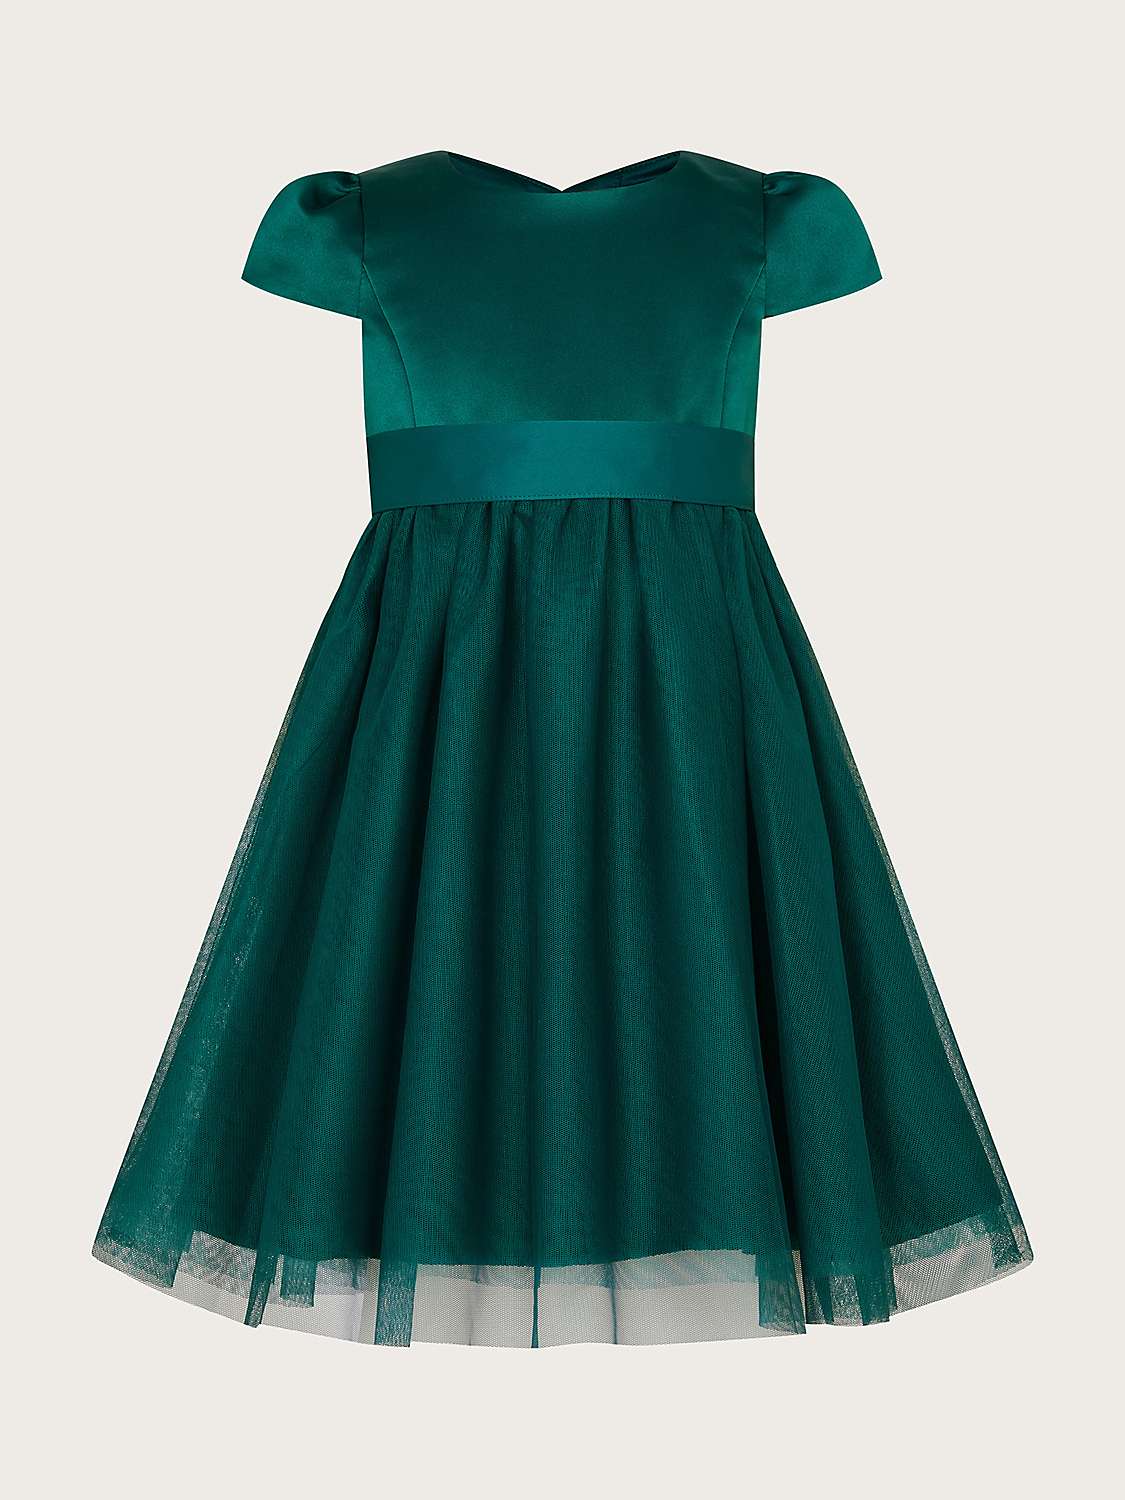 Buy Monsoon Baby Sew Tulle Bridesmaids Dress Online at johnlewis.com